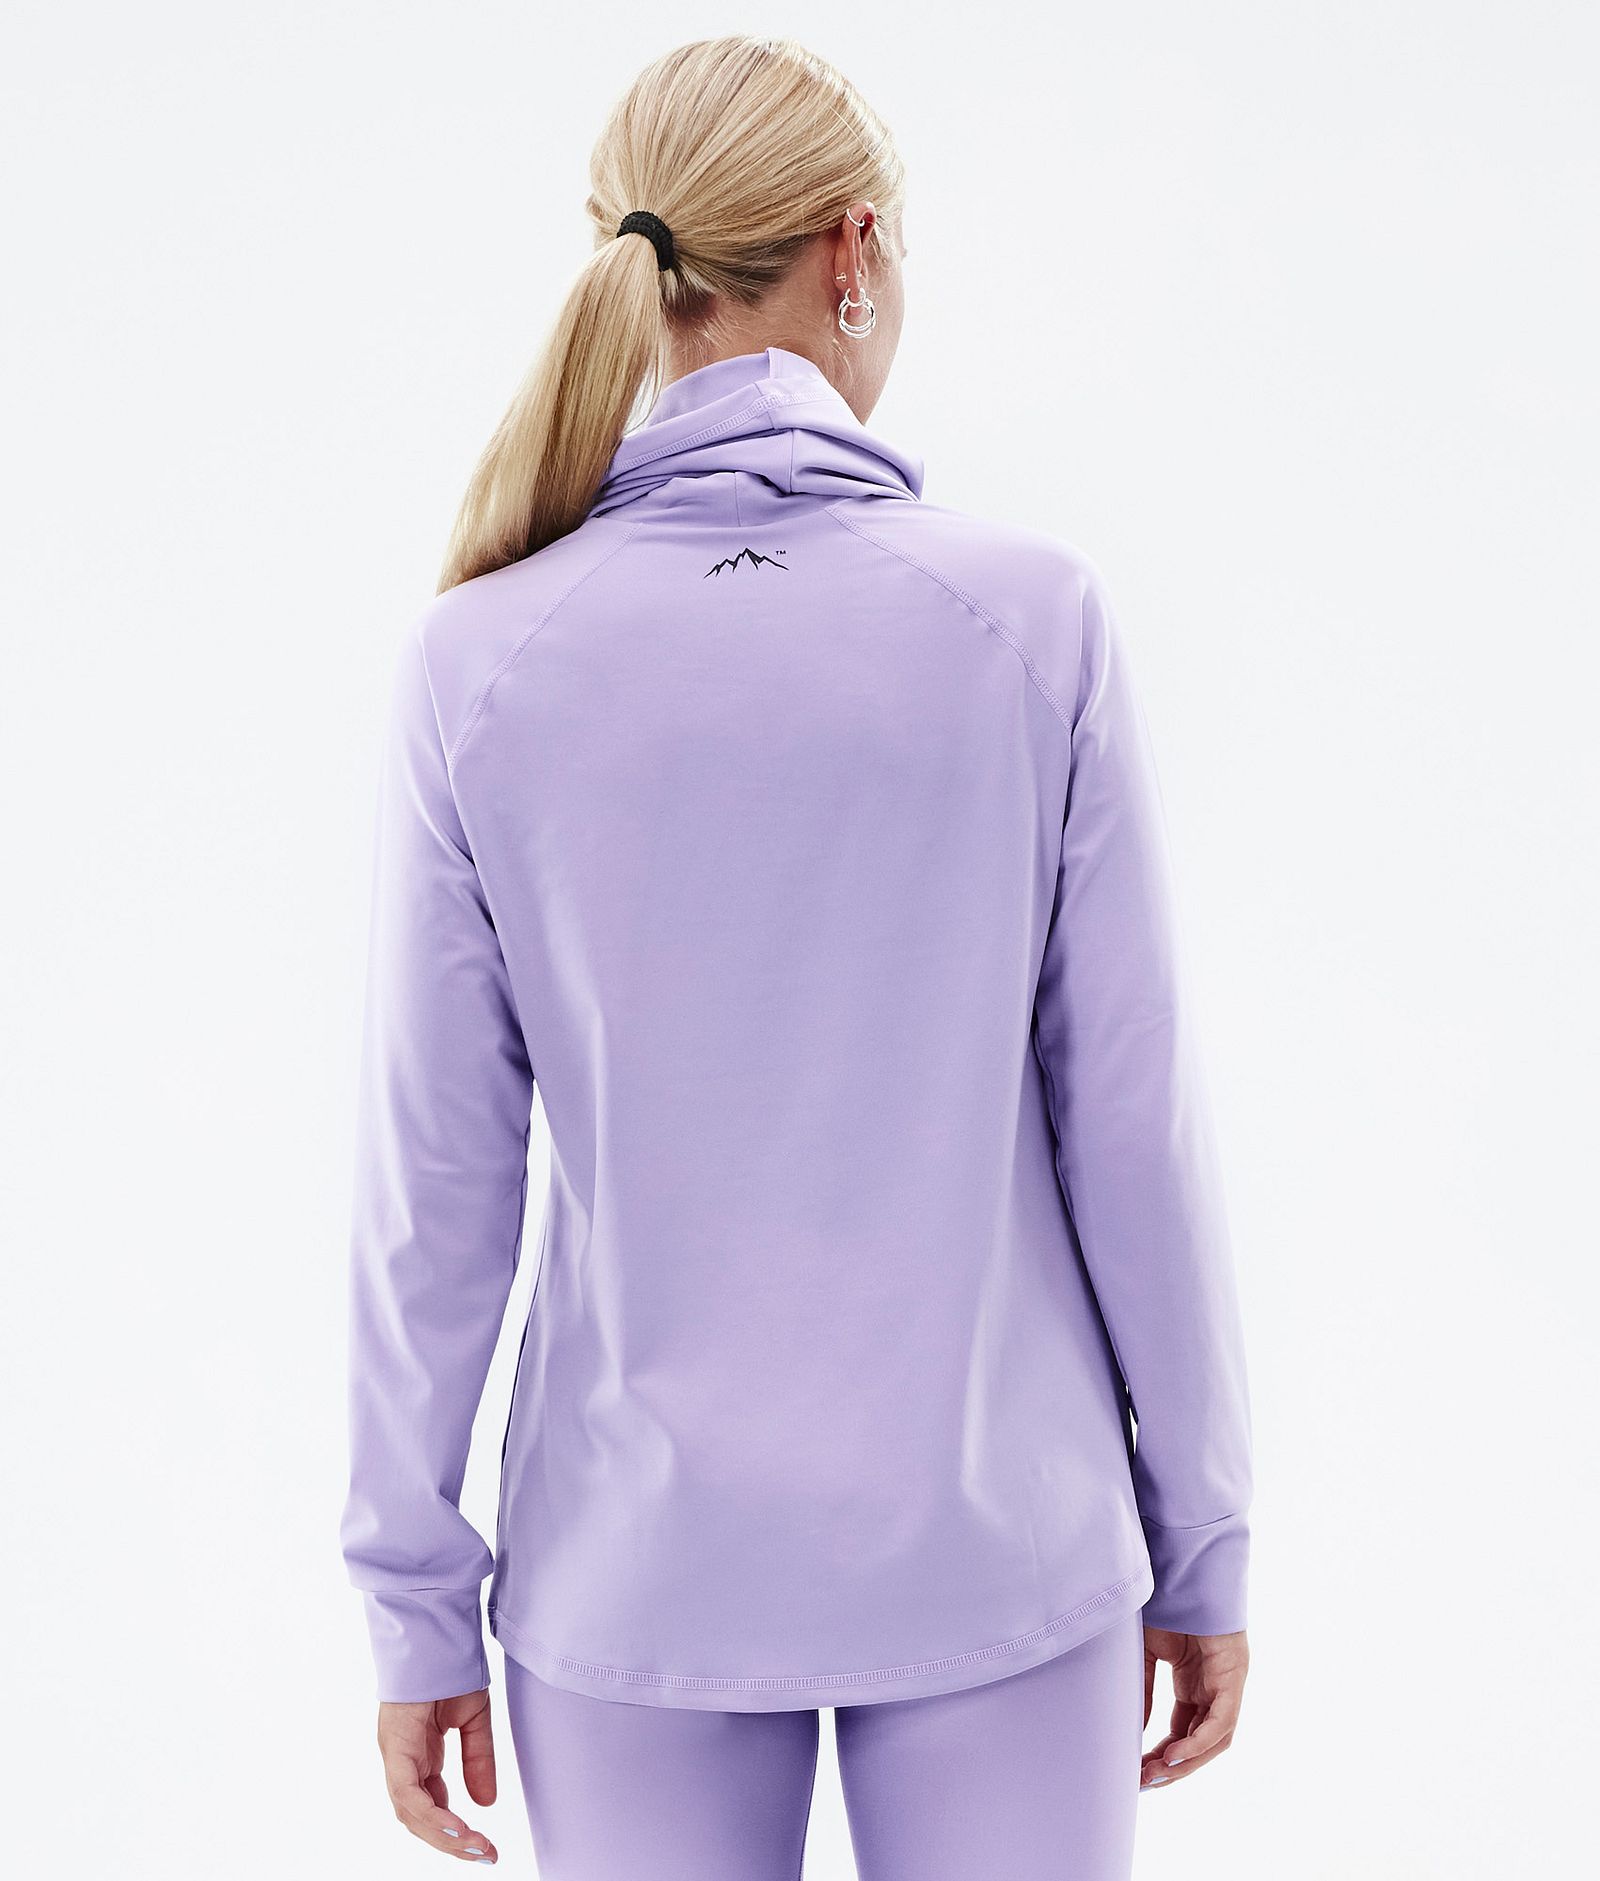 Snuggle W 2022 Base Layer Top Women 2X-Up Faded Violet, Image 3 of 6